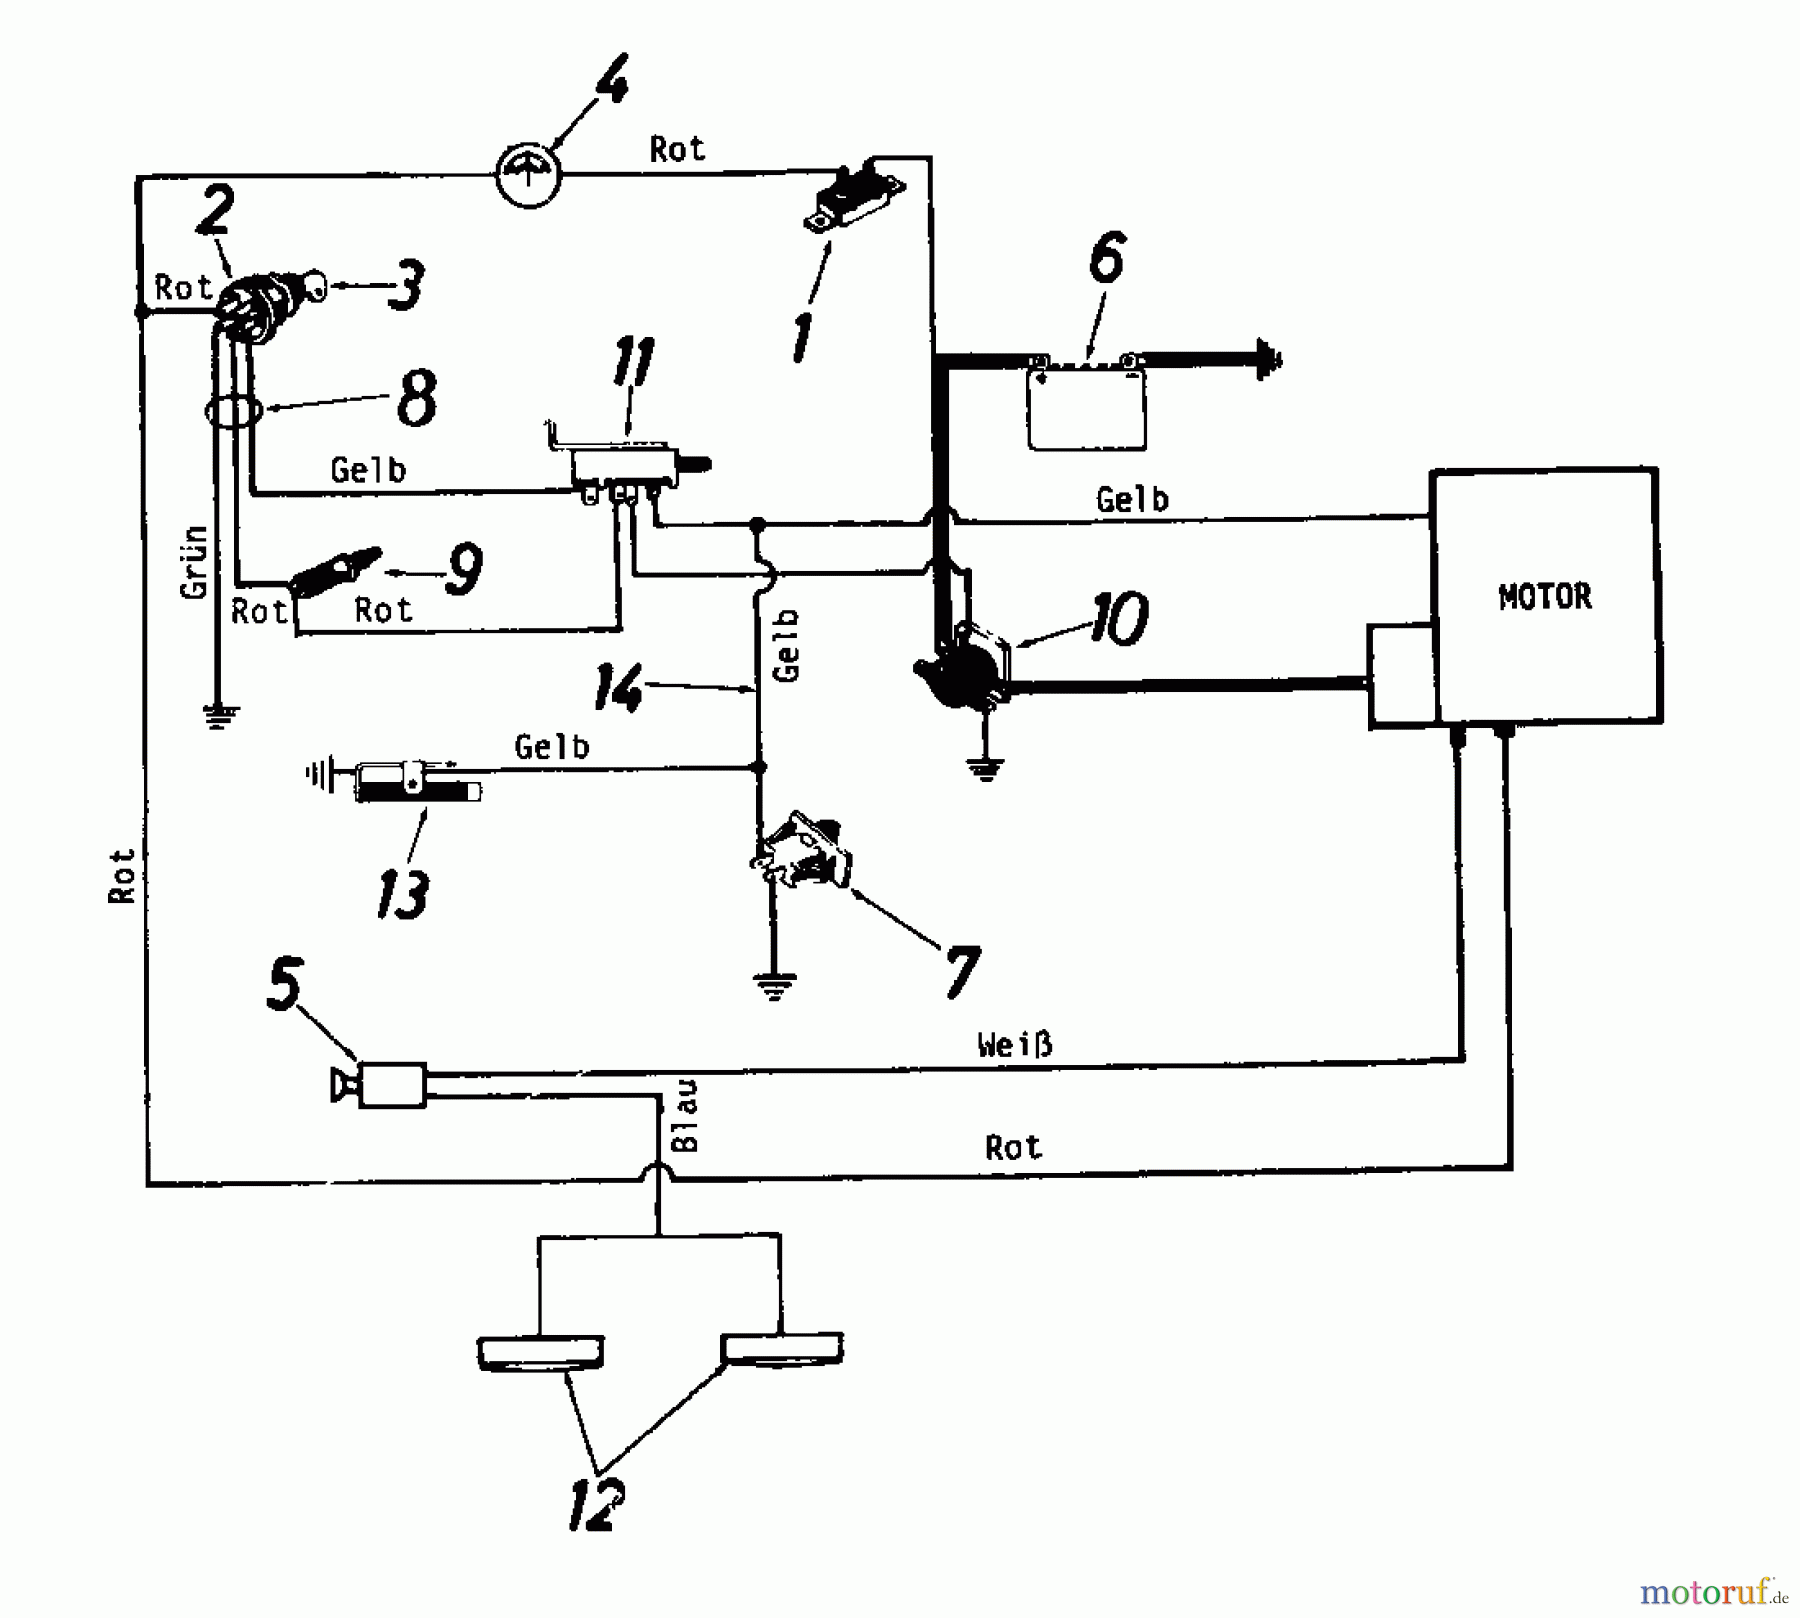  Columbia Lawn tractors RD 11/660 133C524A626  (1993) Wiring diagram